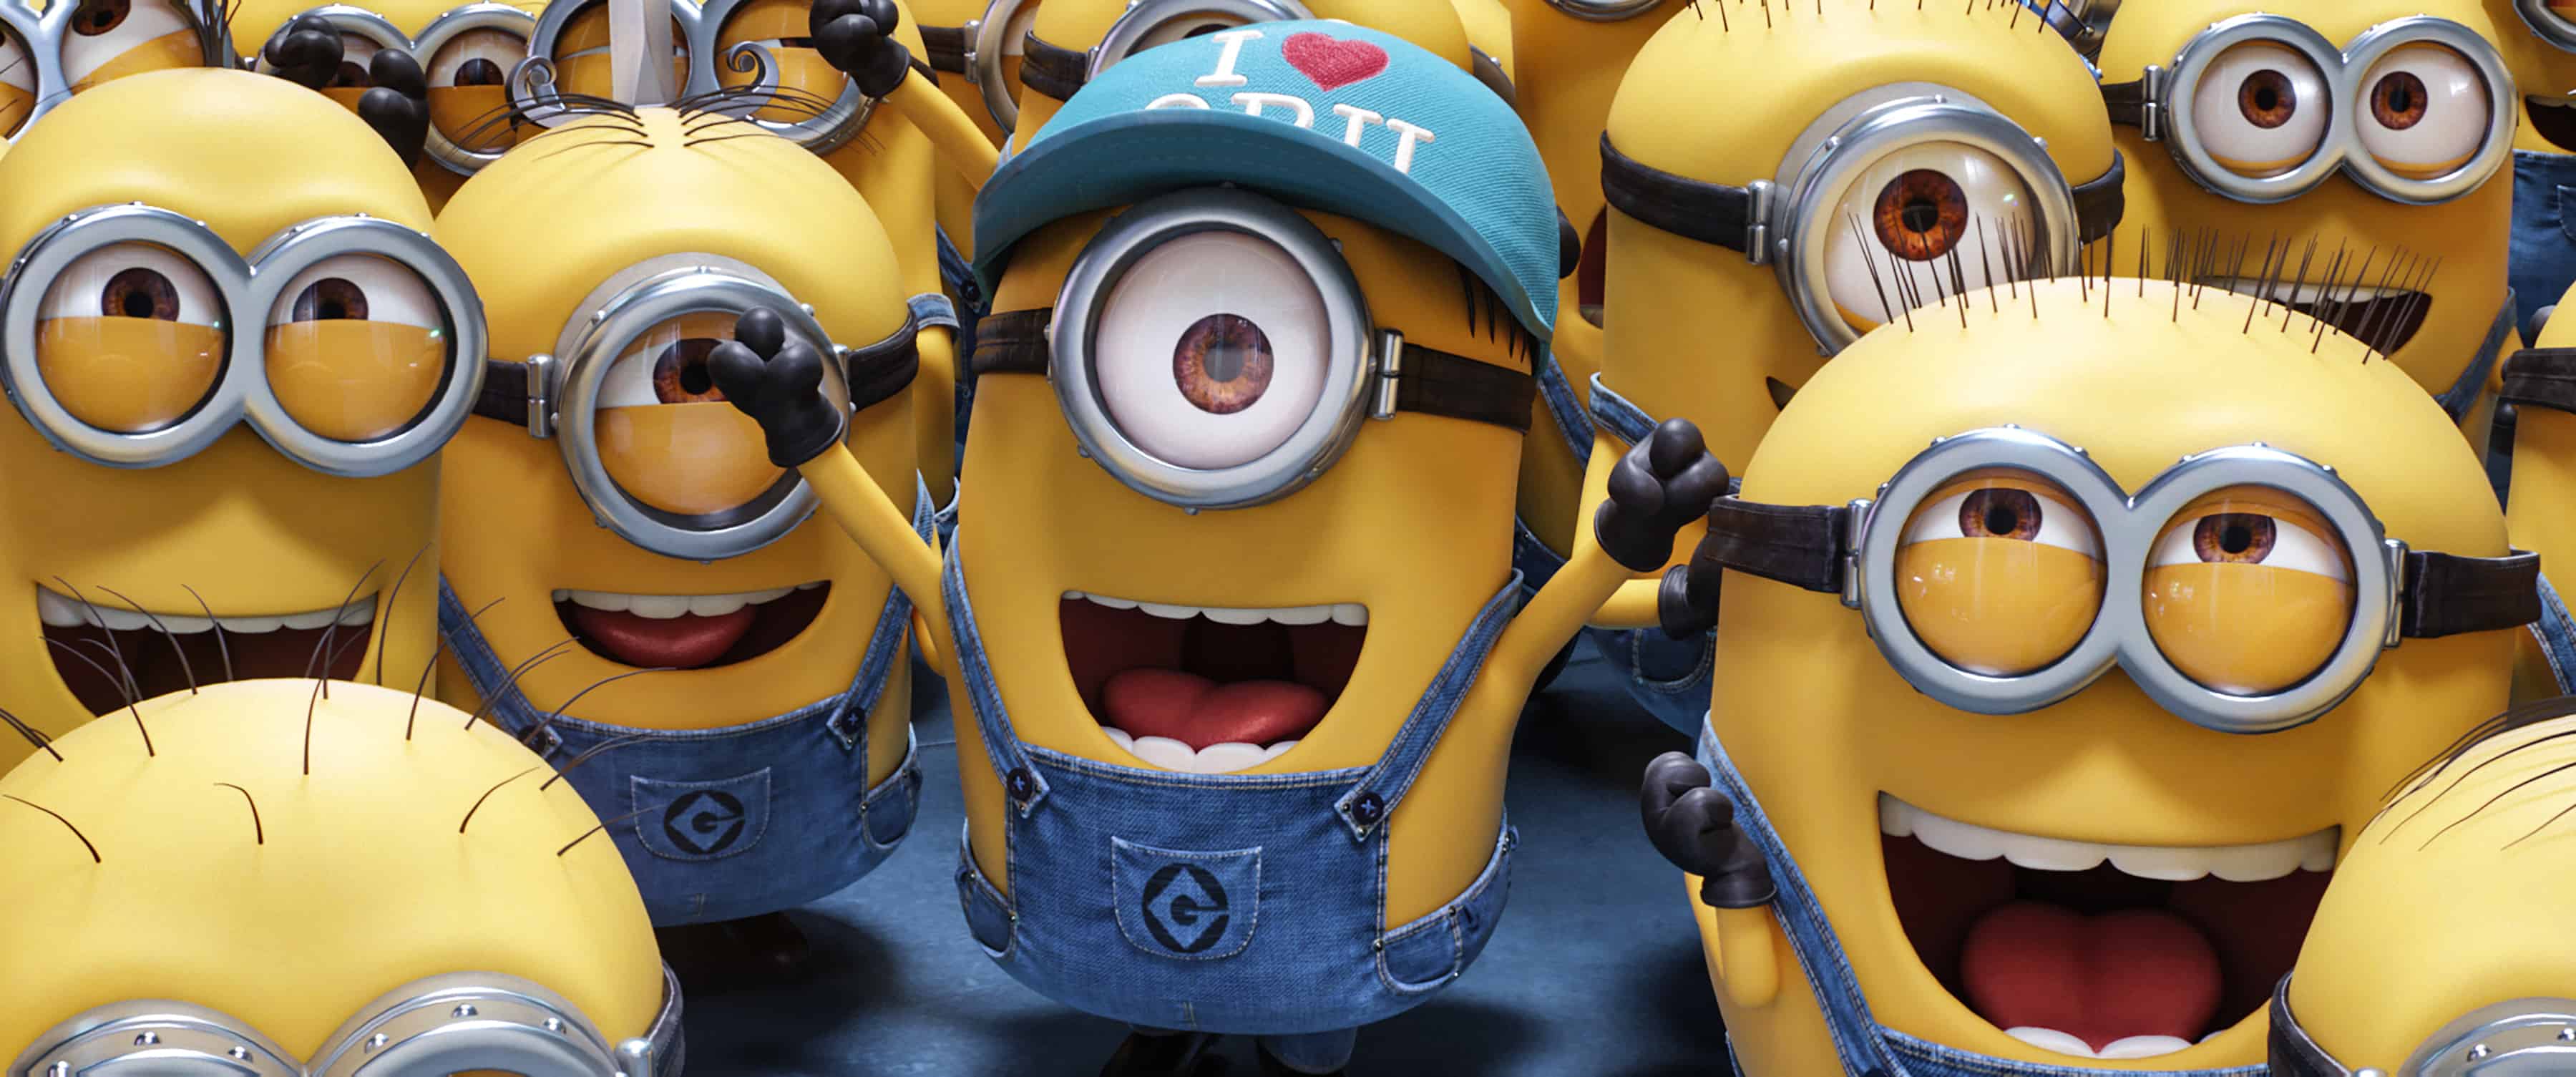 despicable me 1 full movie for free